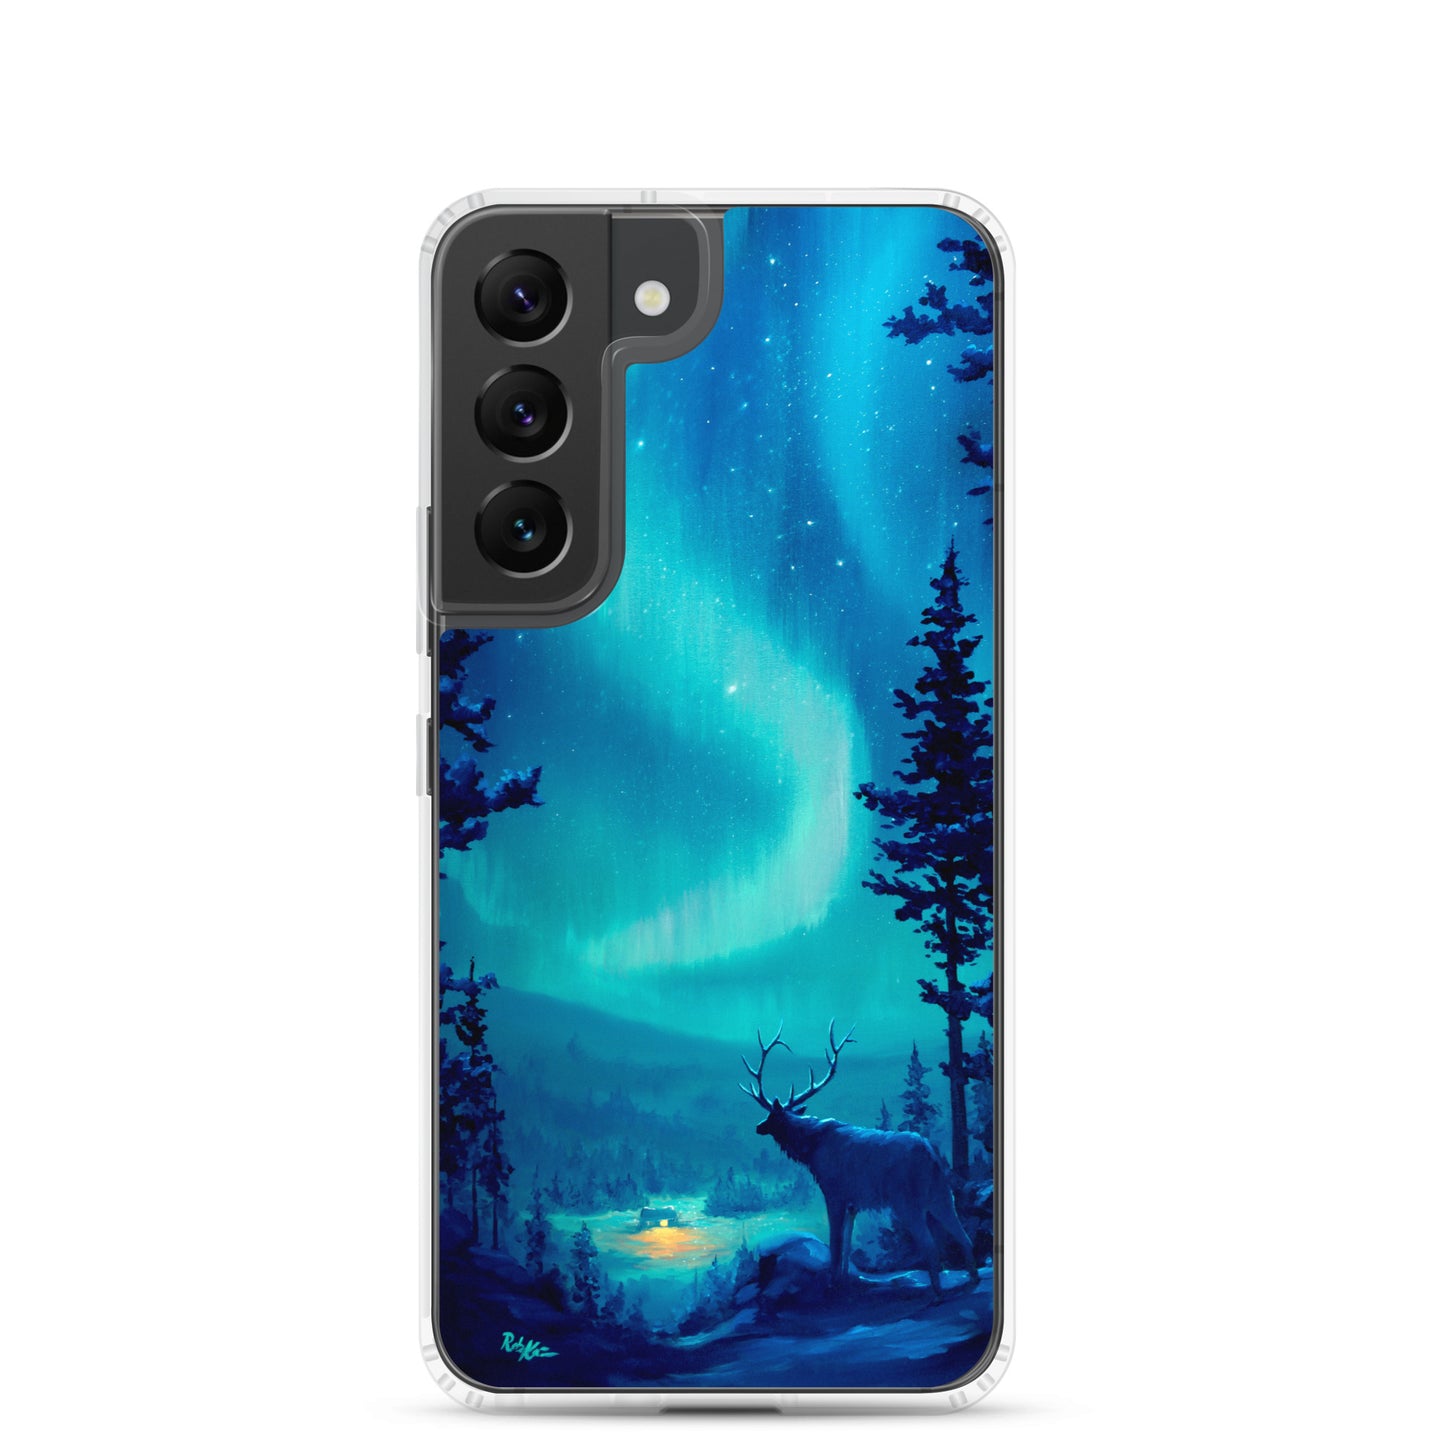 Samsung Case featuring Northern Light by Rob Kaz